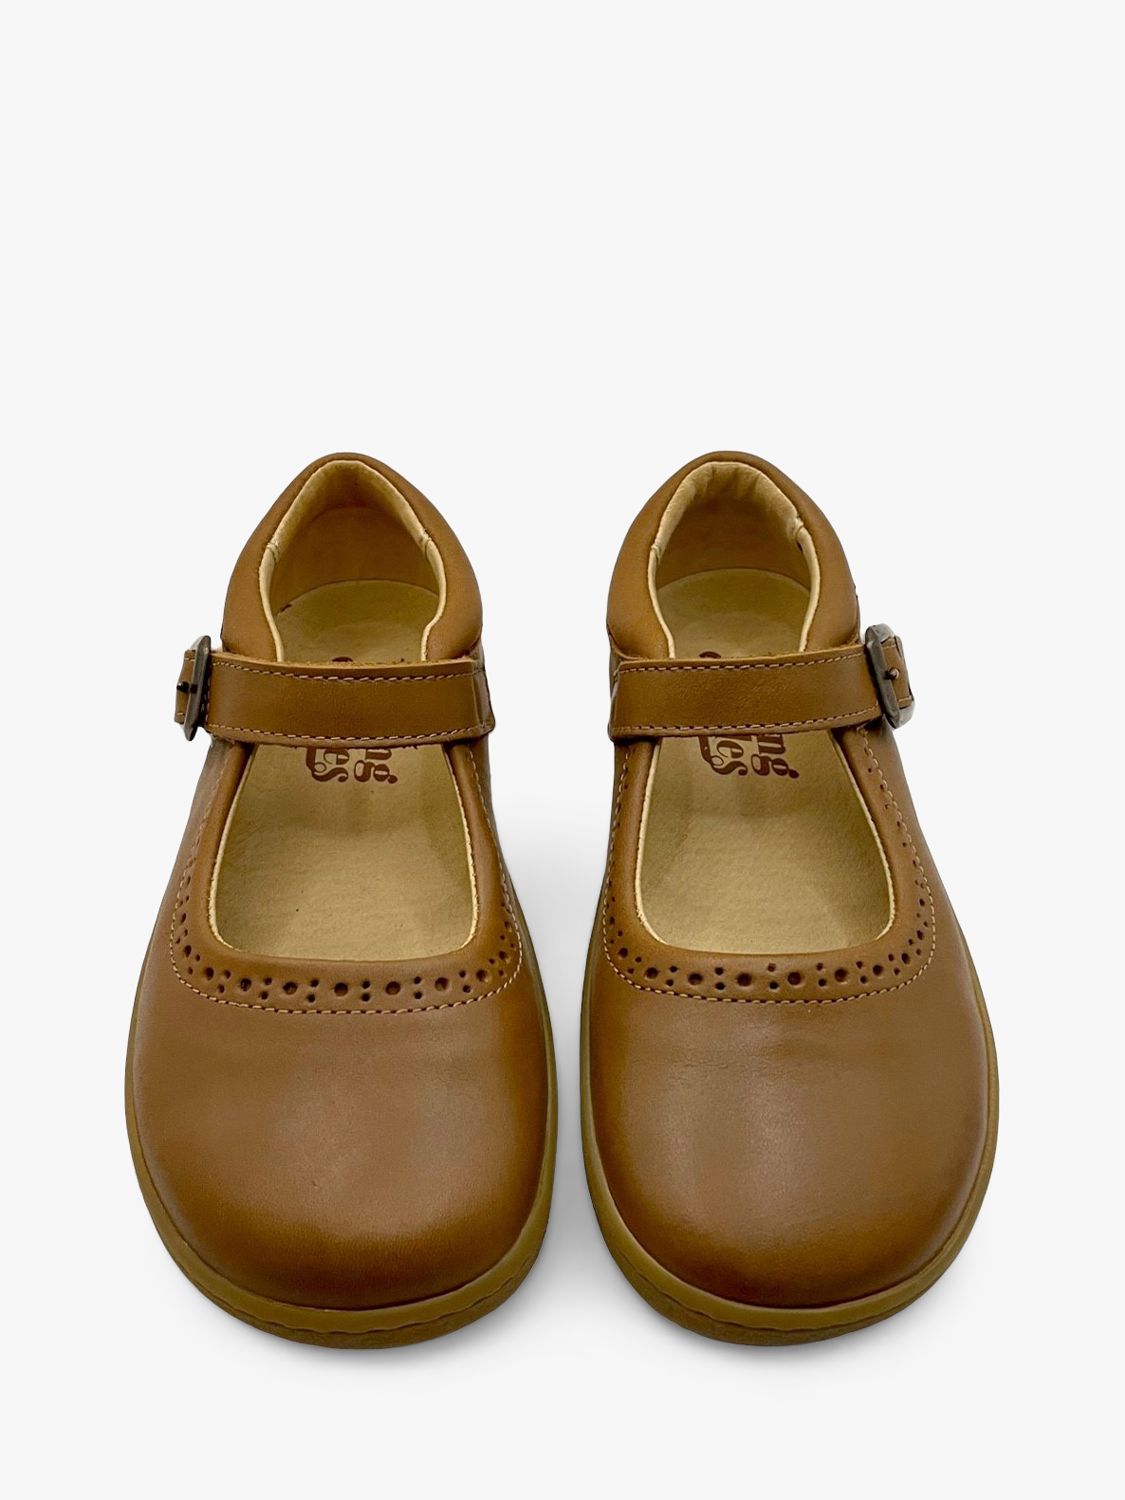 Young Soles Kids' Holly Mary Jane Shoes, Tan, 9.5 Jnr